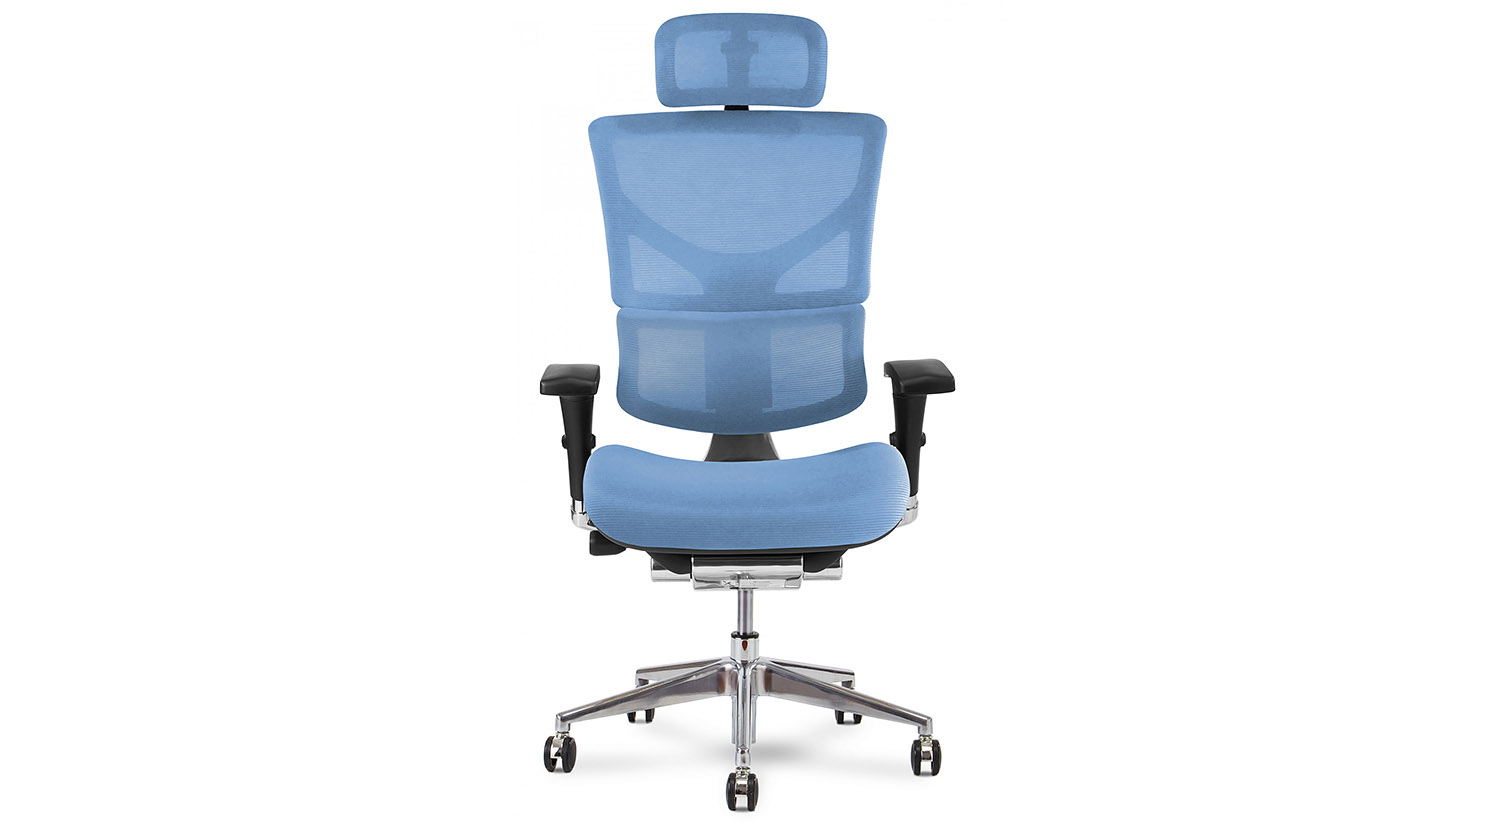 https://www.circlefurniture.com/userfiles/images/Products/X-Chair/X3-ATR-Mgmt-Chair/x3-blue-front-main.jpg